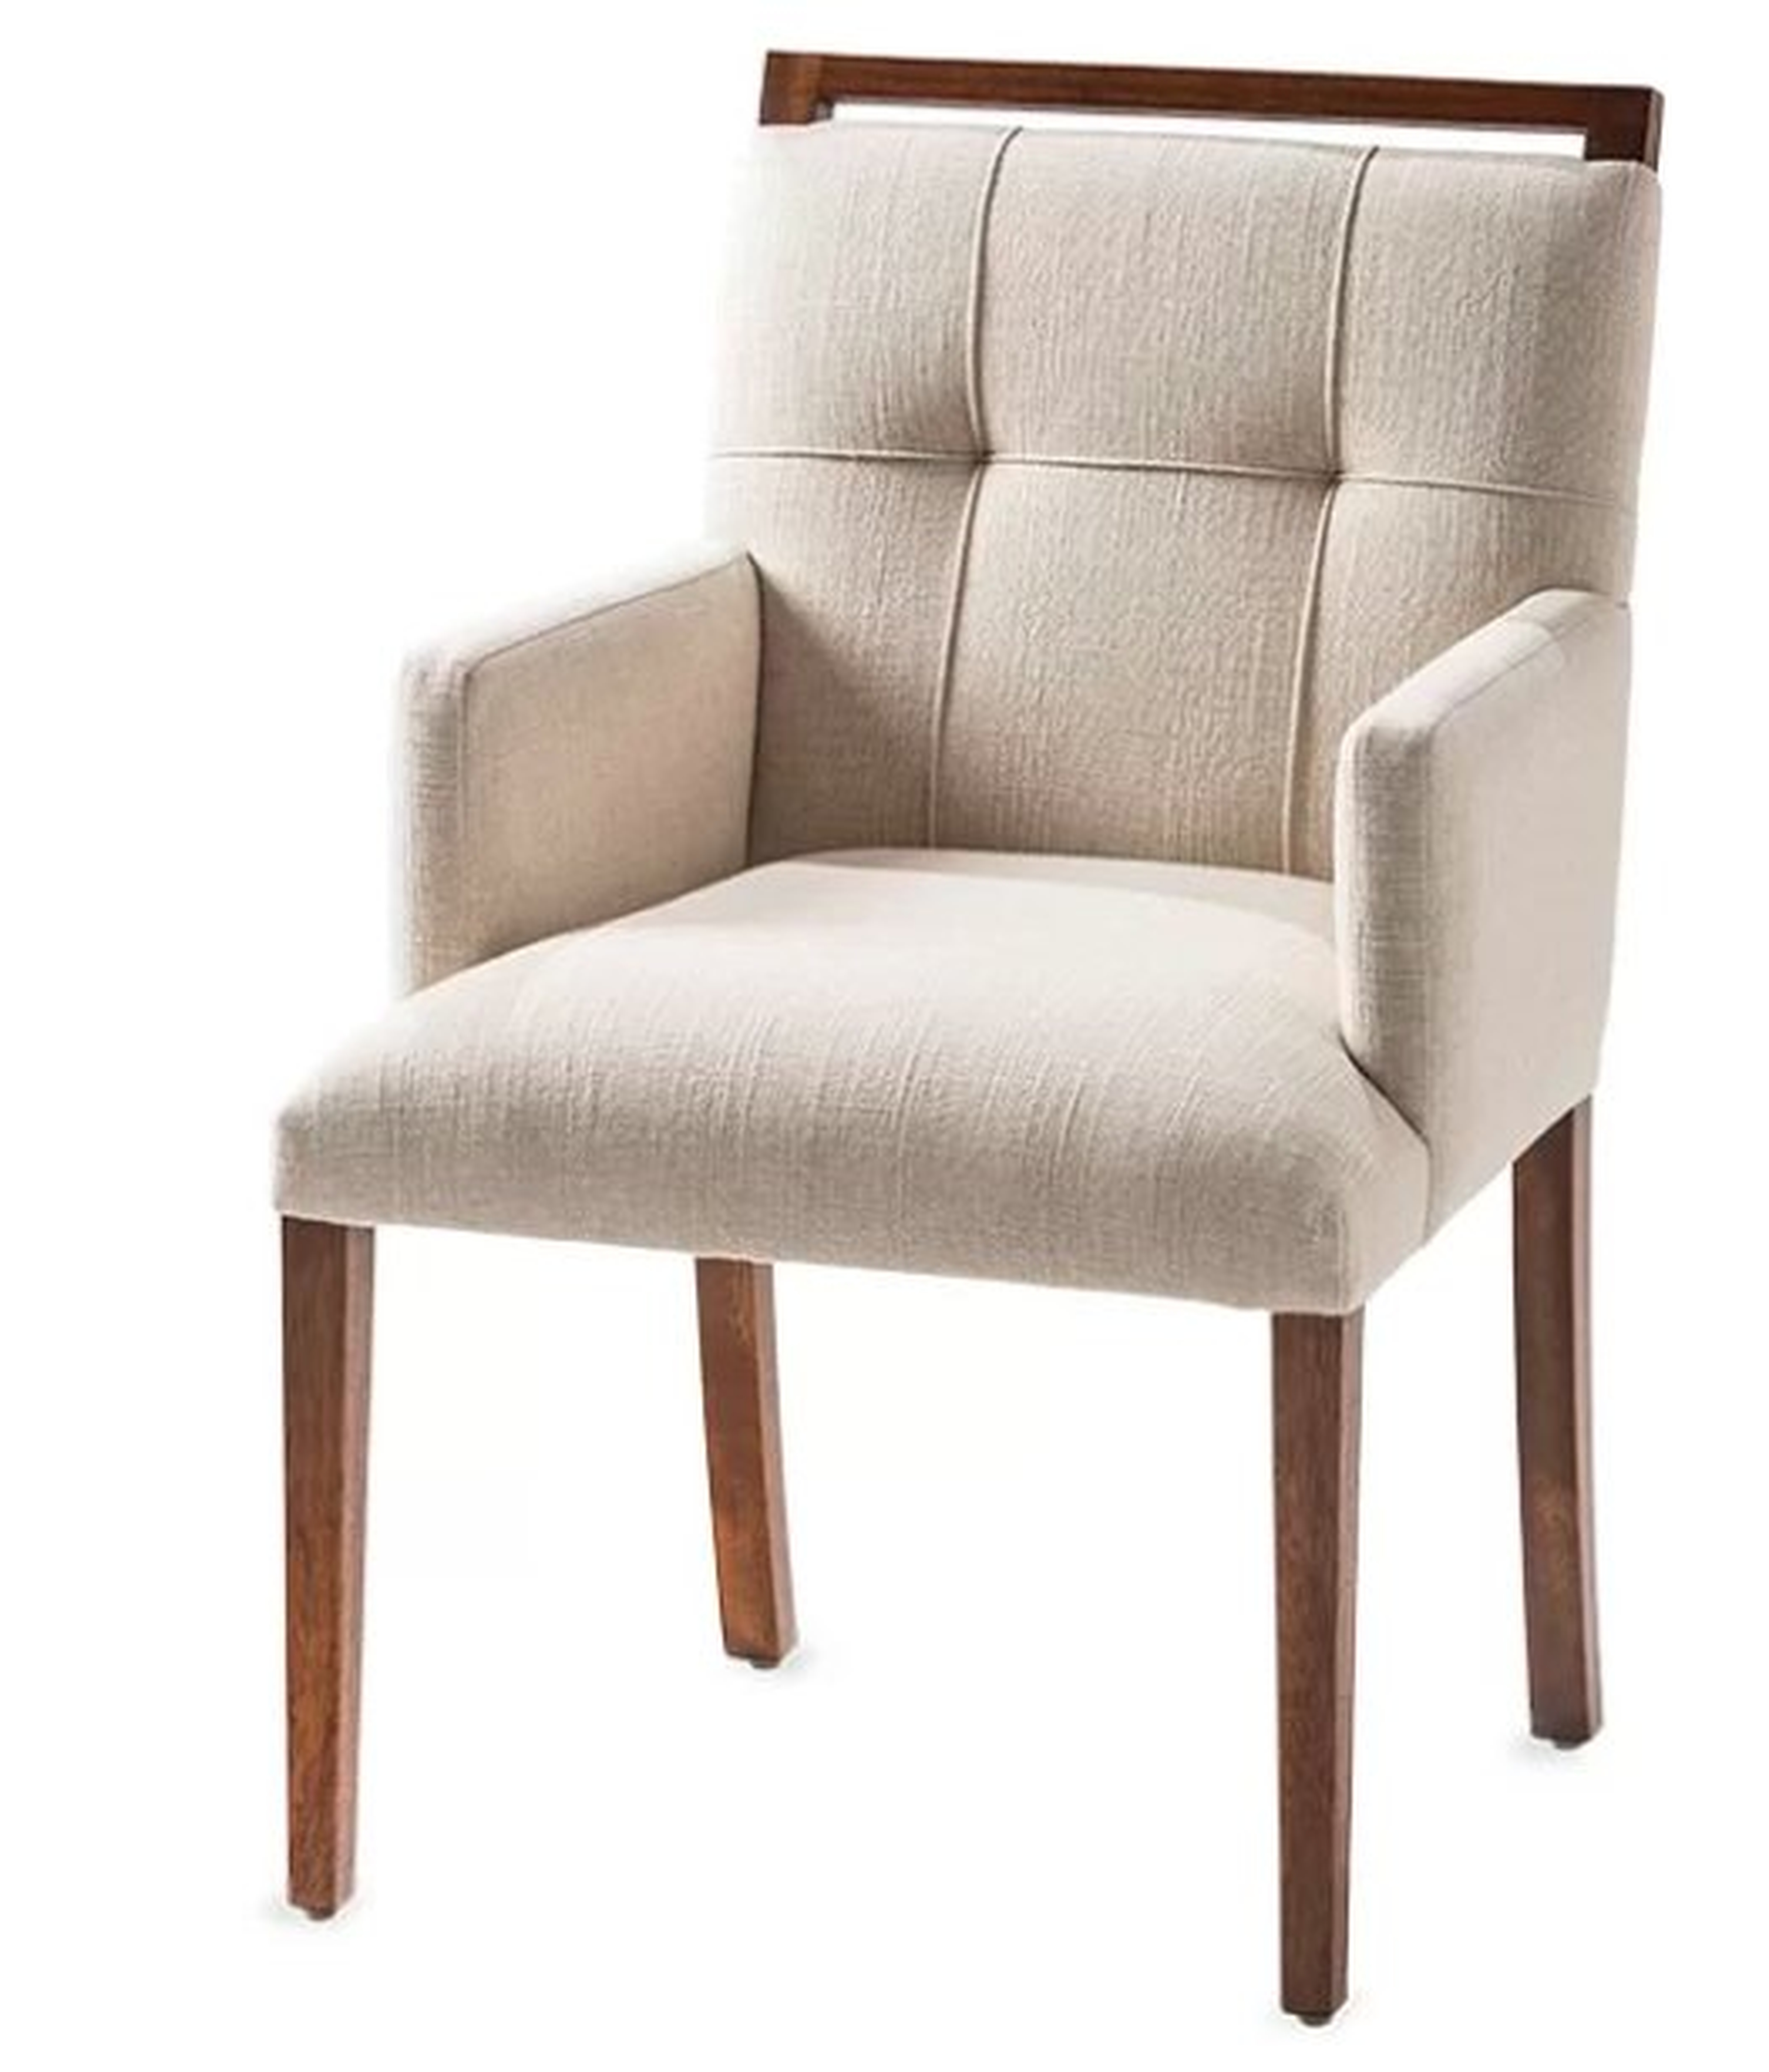 H UPHOLSTERED DINING CHAIR - Perigold